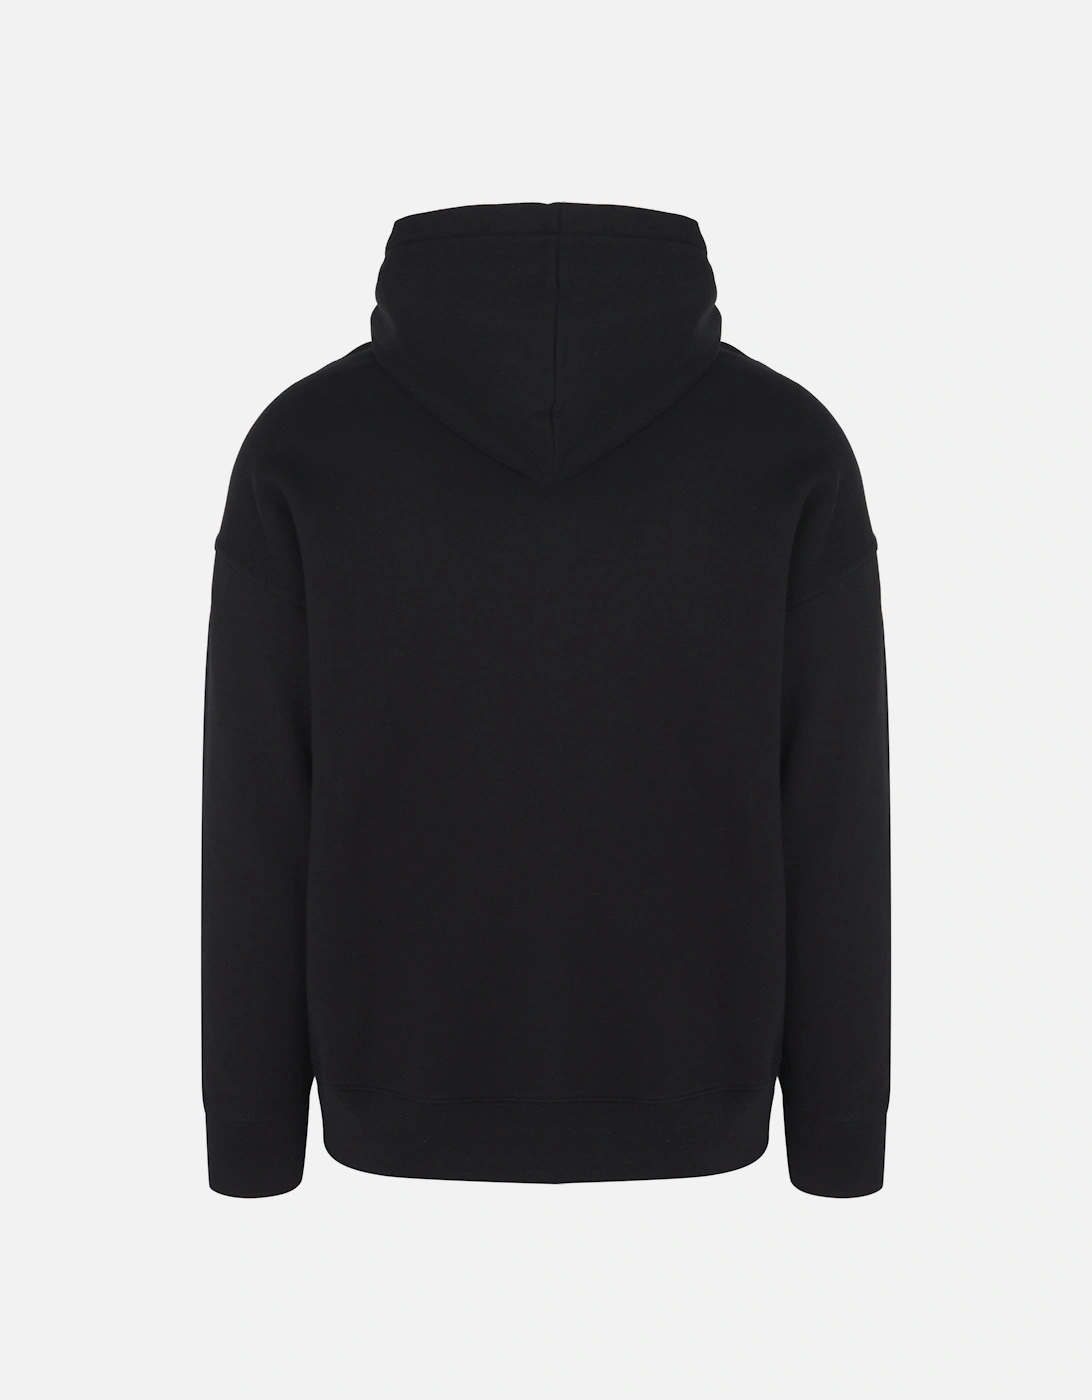 Cotton Hooded Top Black